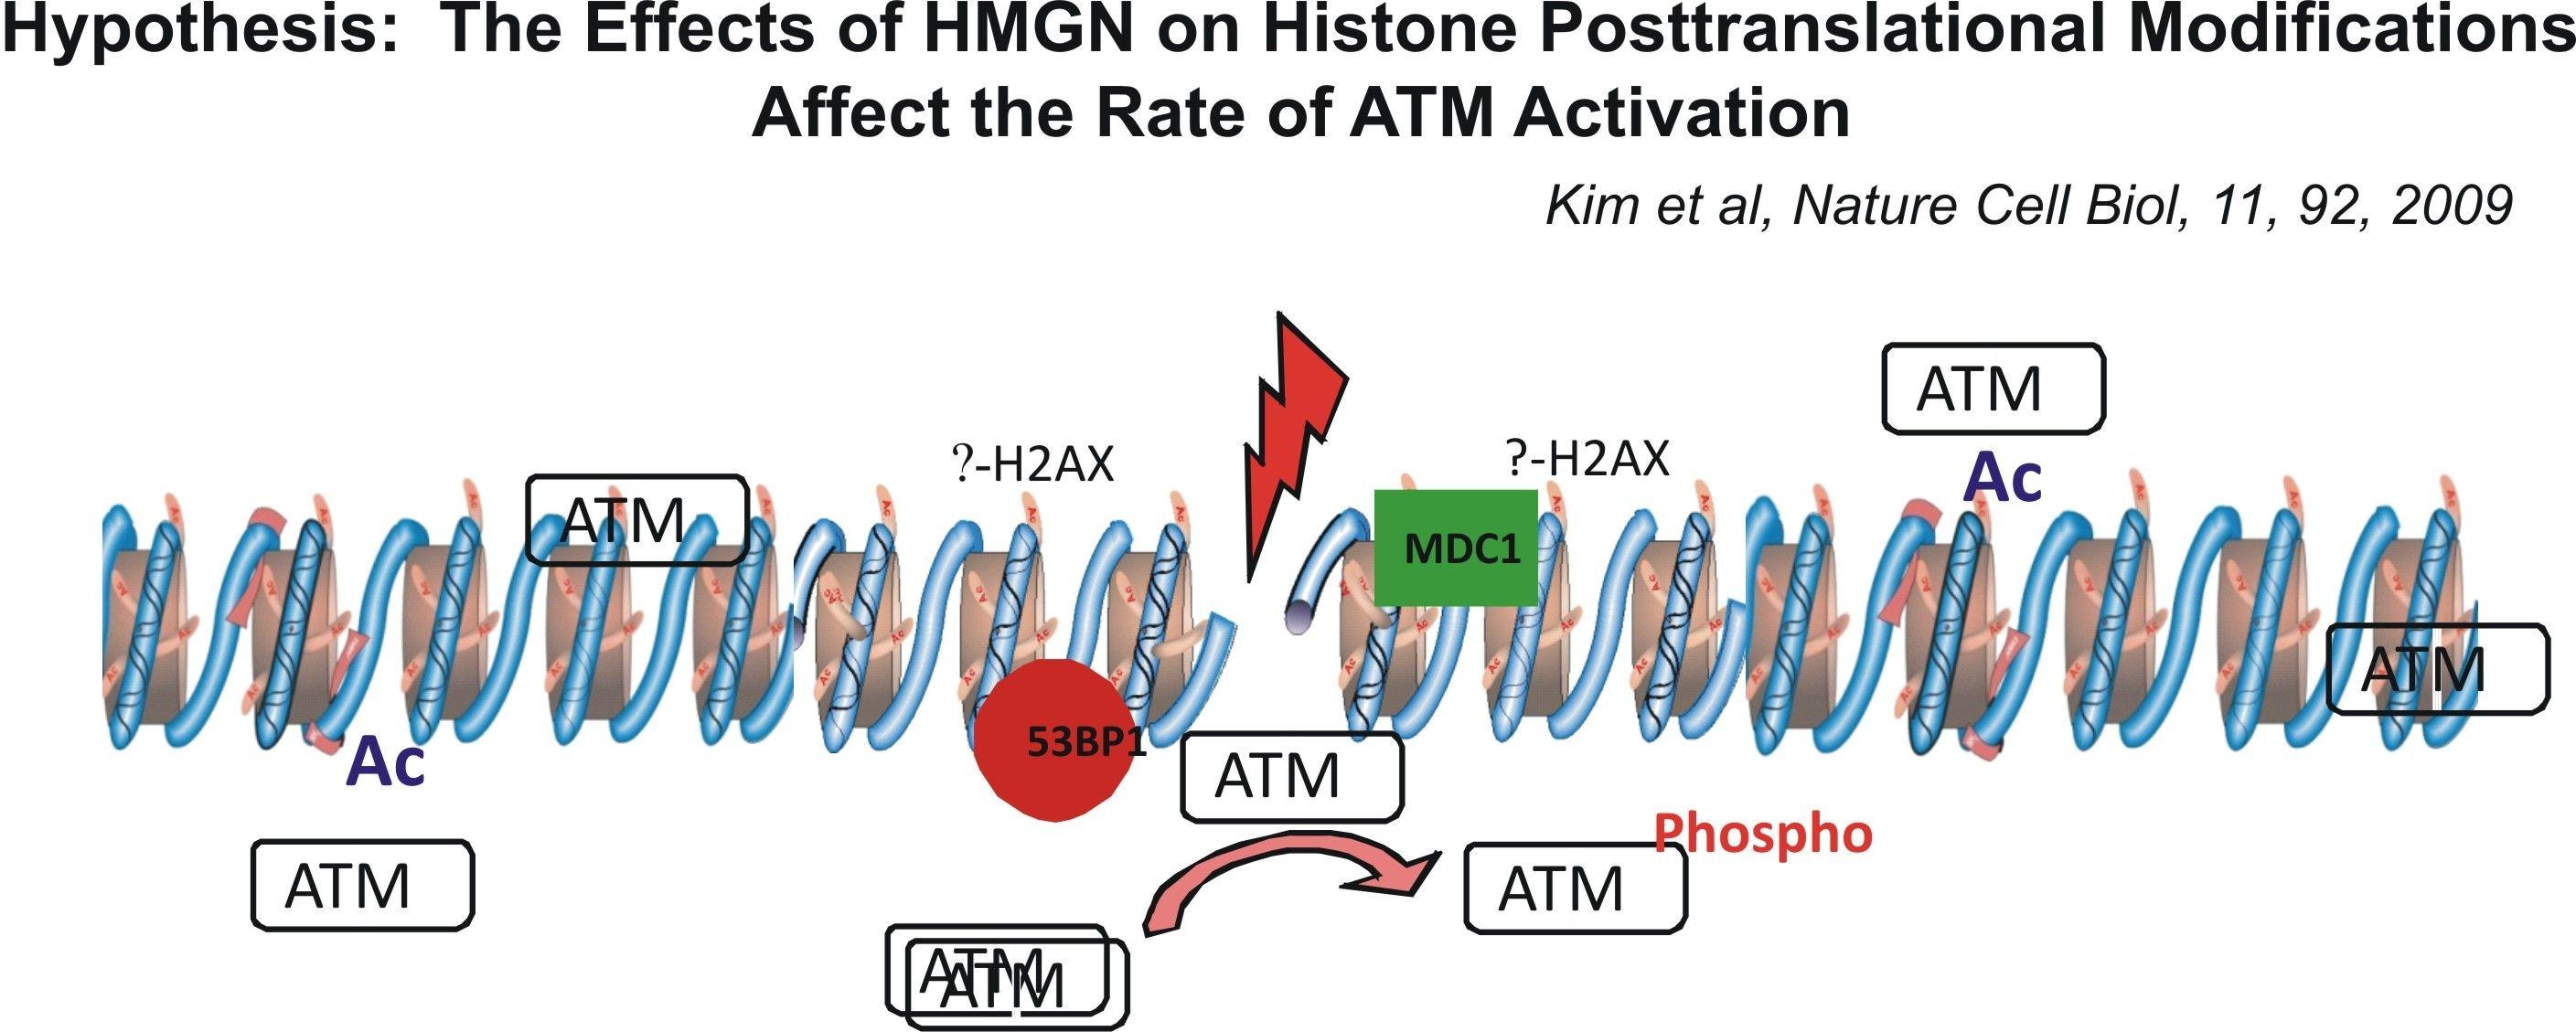 Hypothesis: The effects of HMGN on histone posttranslational modifications affect the rate of ATM activation.